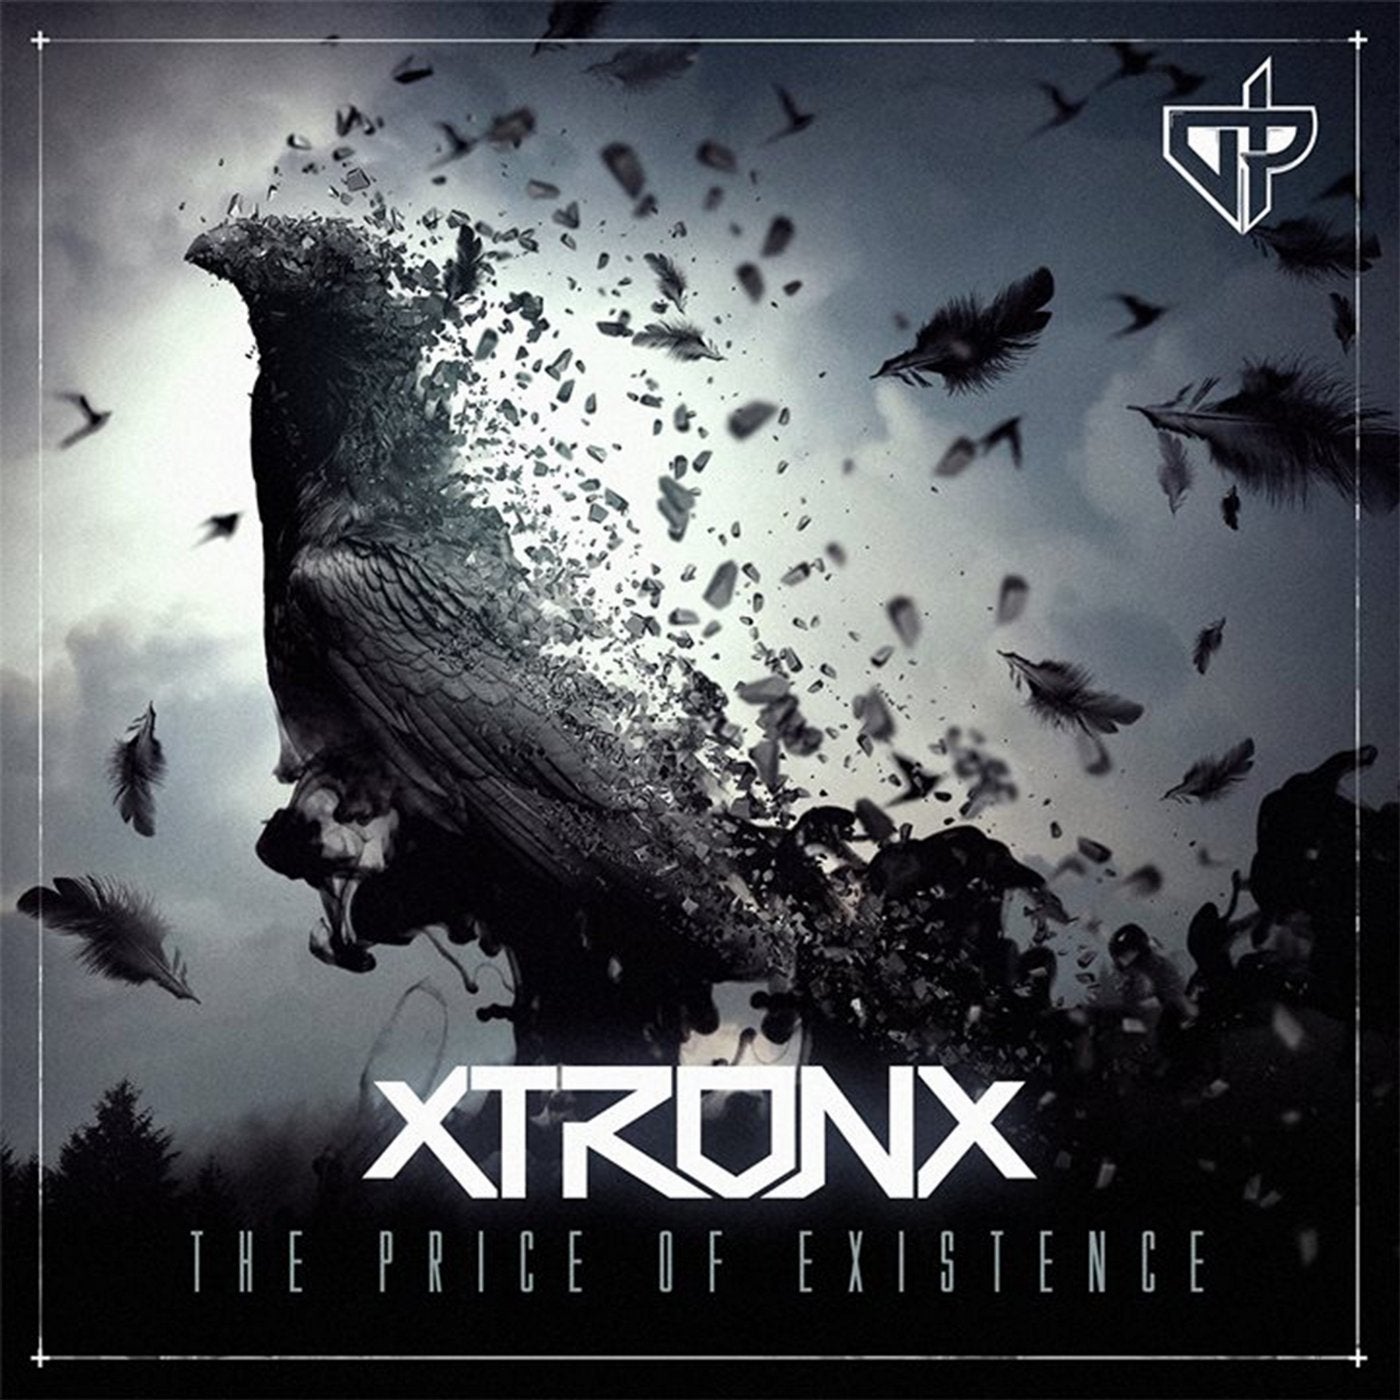 The Price of Existence EP